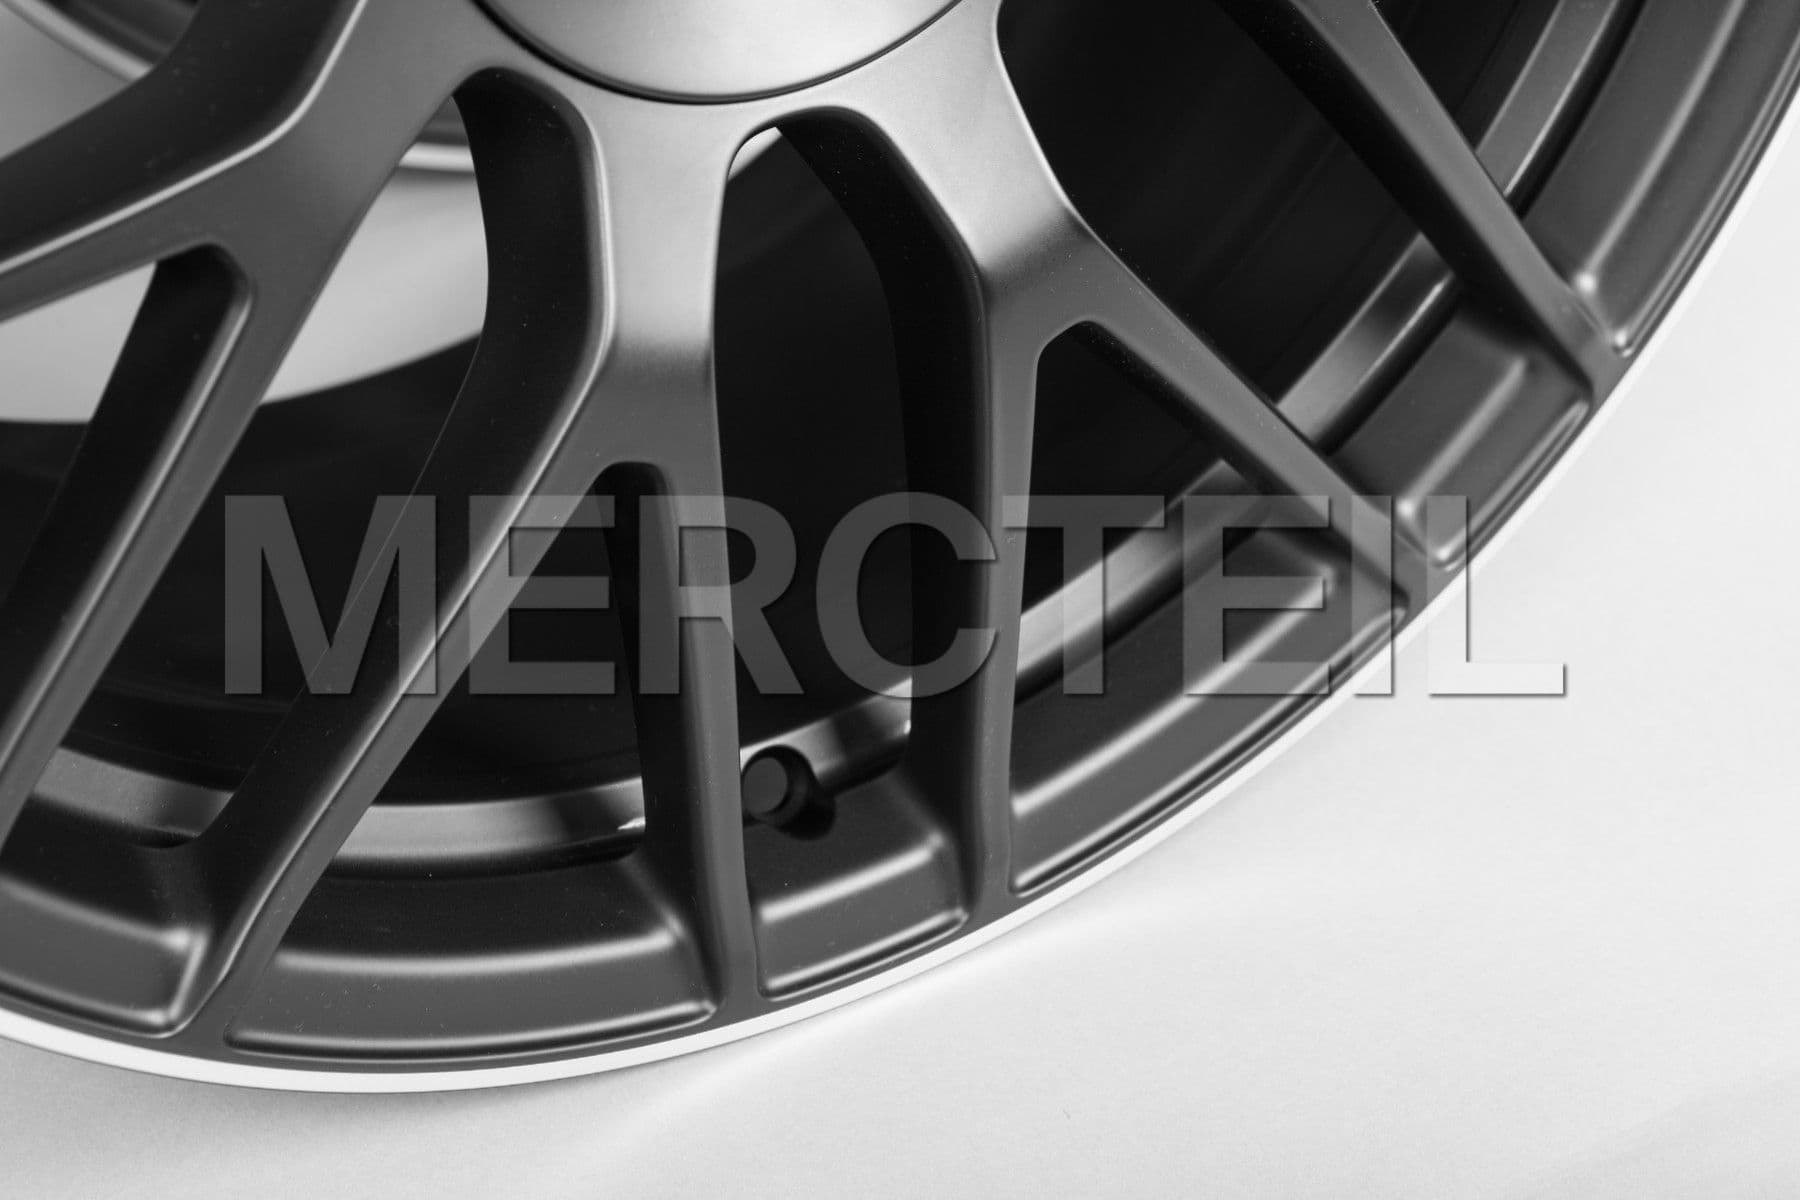 AMG GT Wheels Forged Black Genuine Mercedes Benz (part number: A19040107007X71)